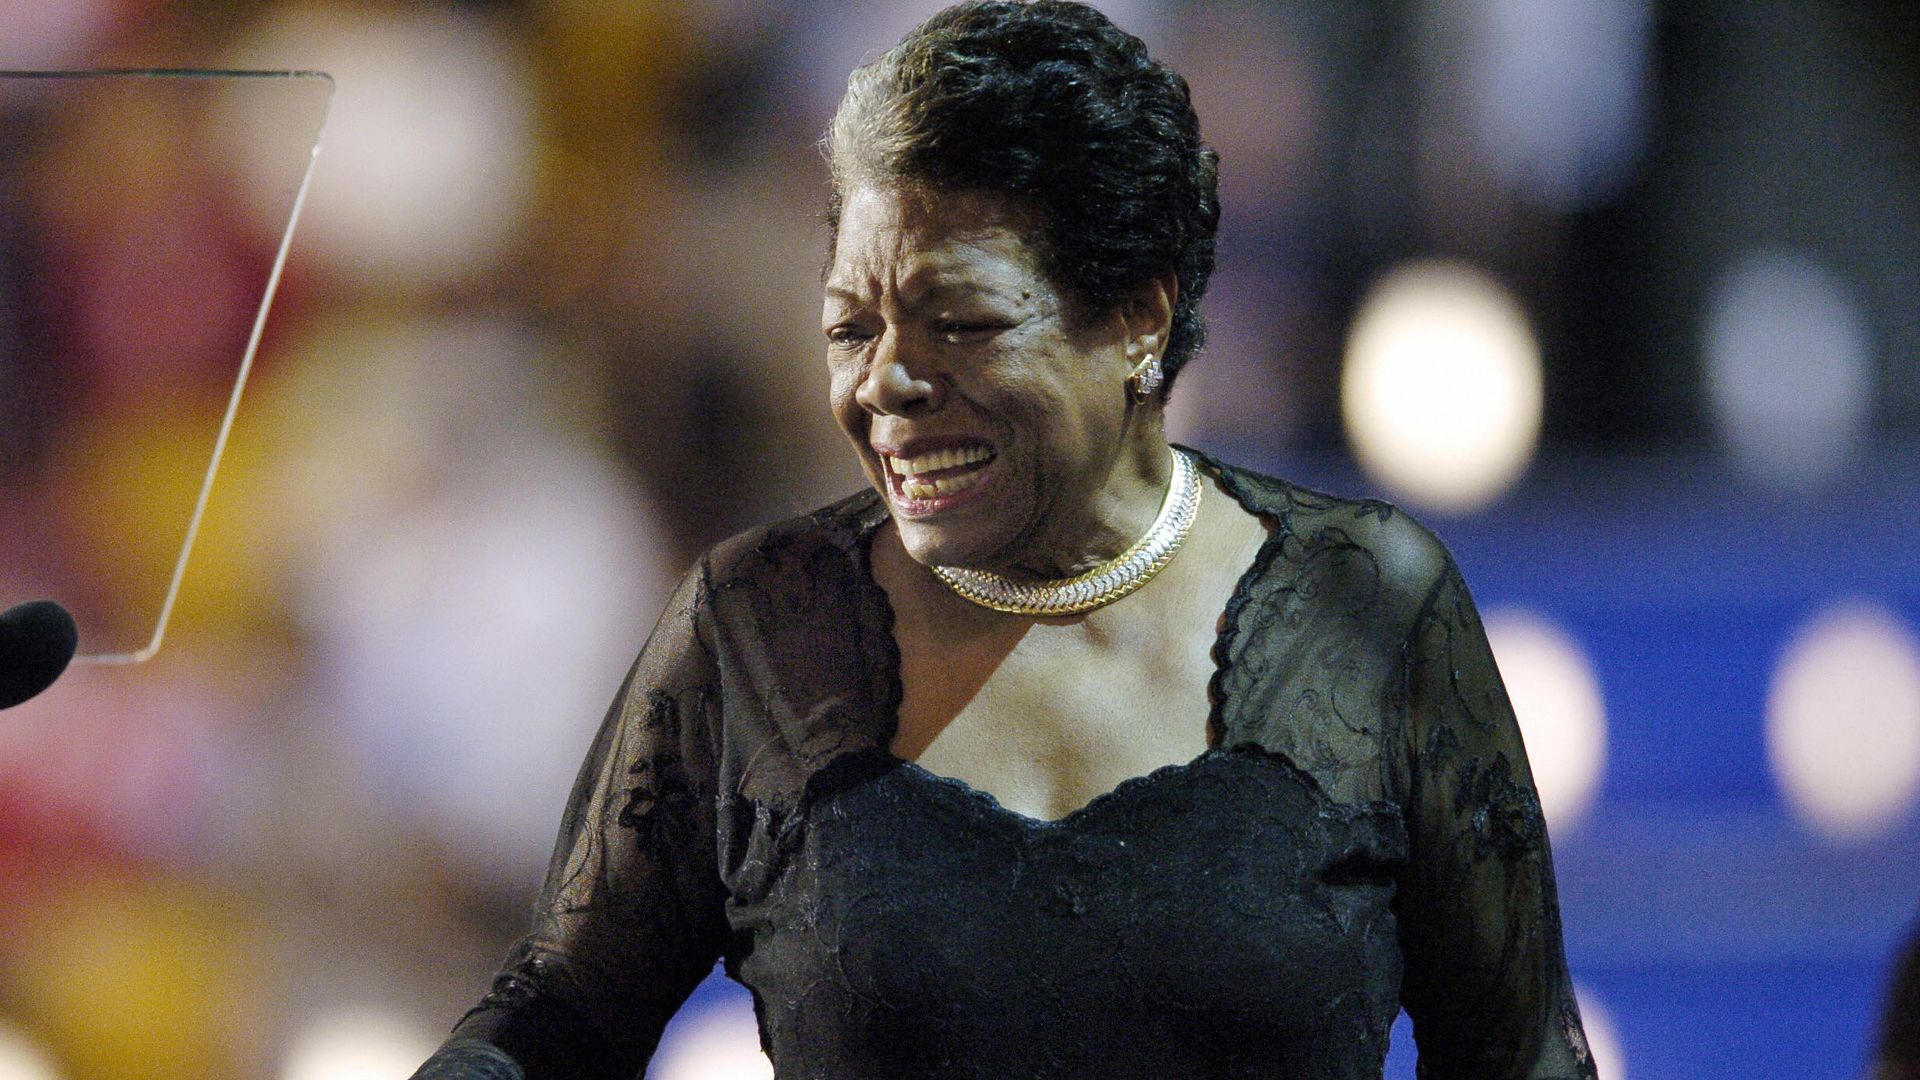 Photo of Maya Angelou wearing a black dress and smiling